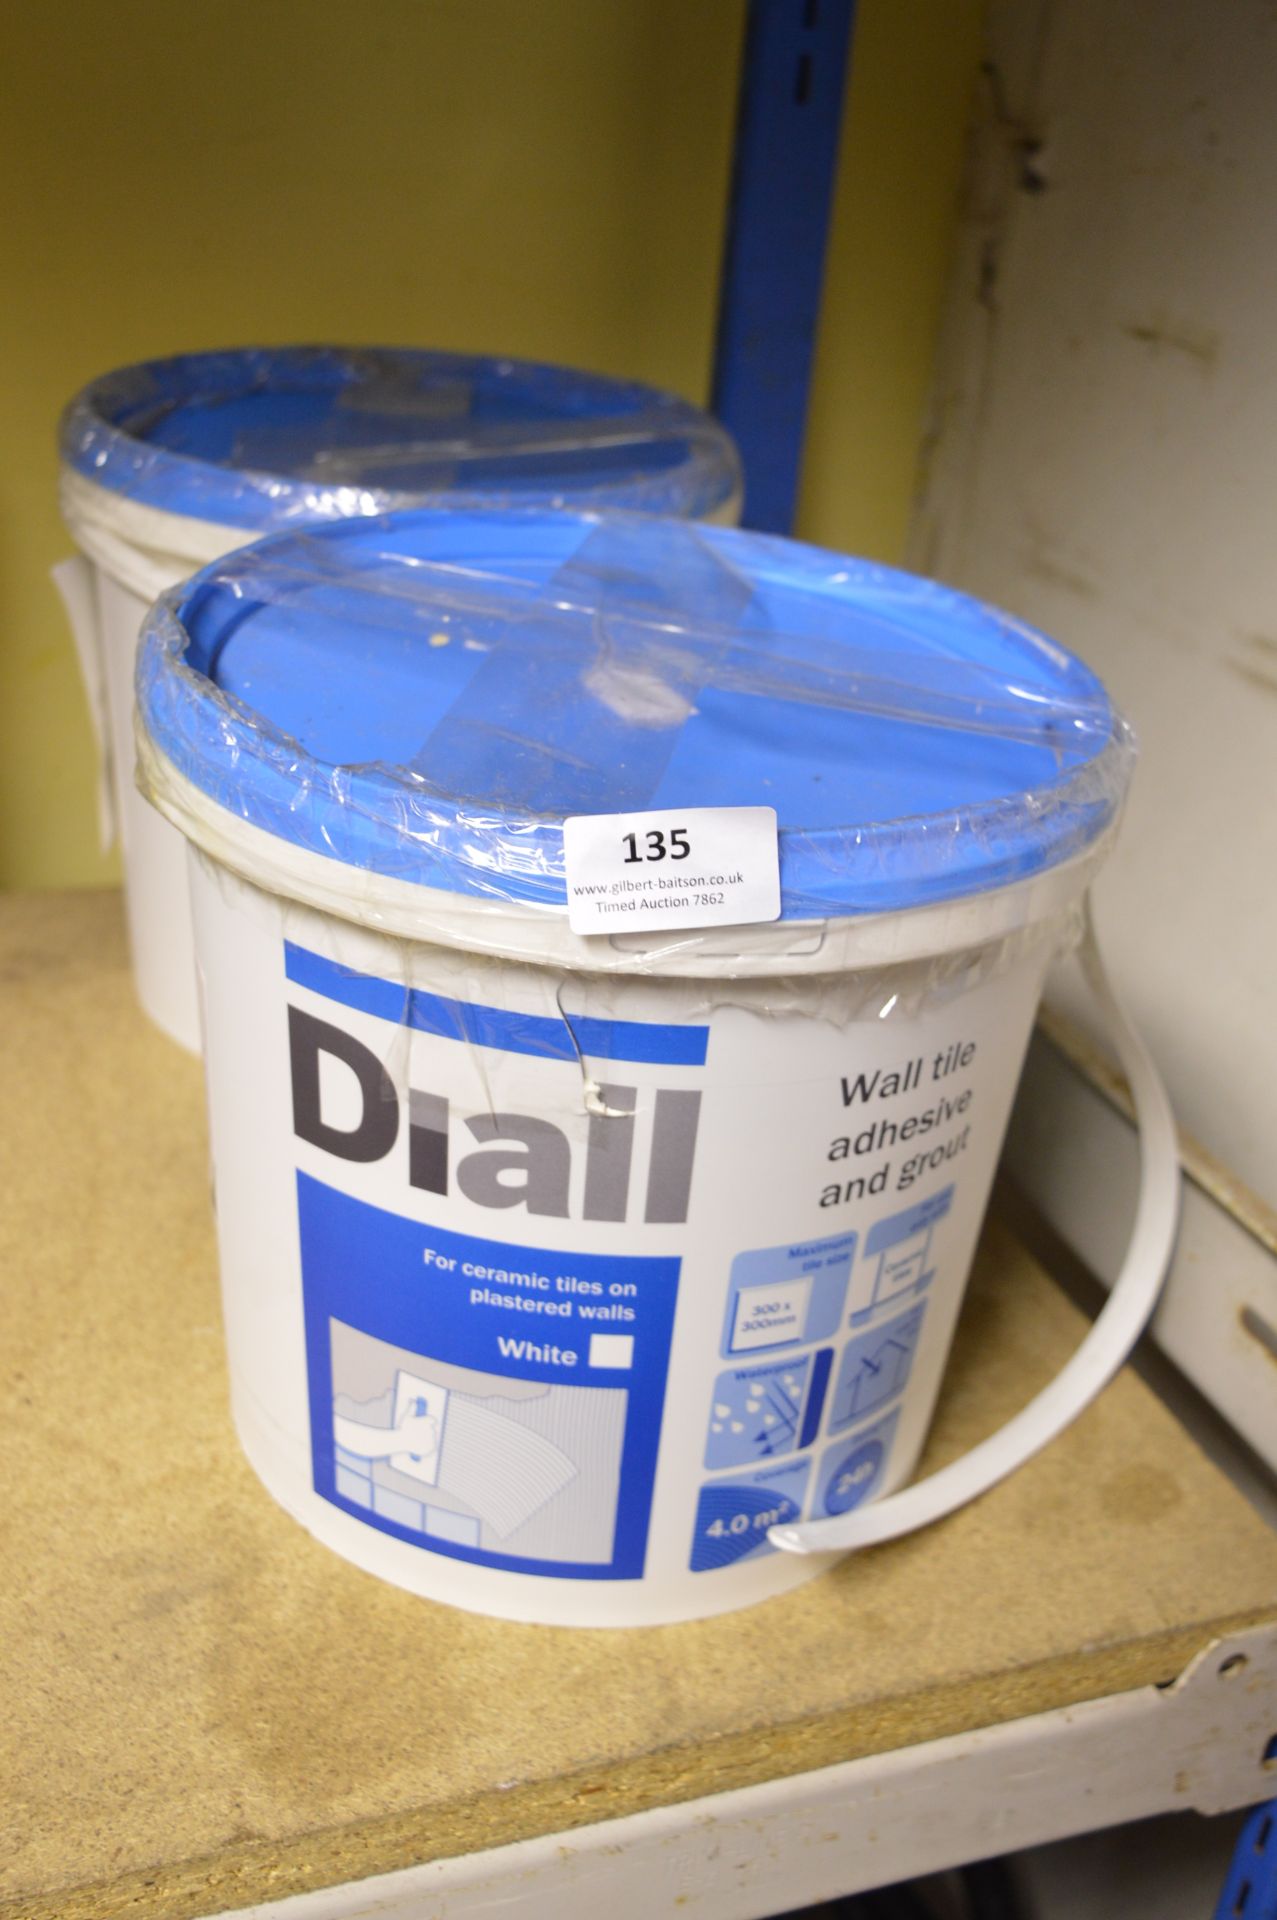 *2x6.6Kg of Diall Tile Adhesive & Grout